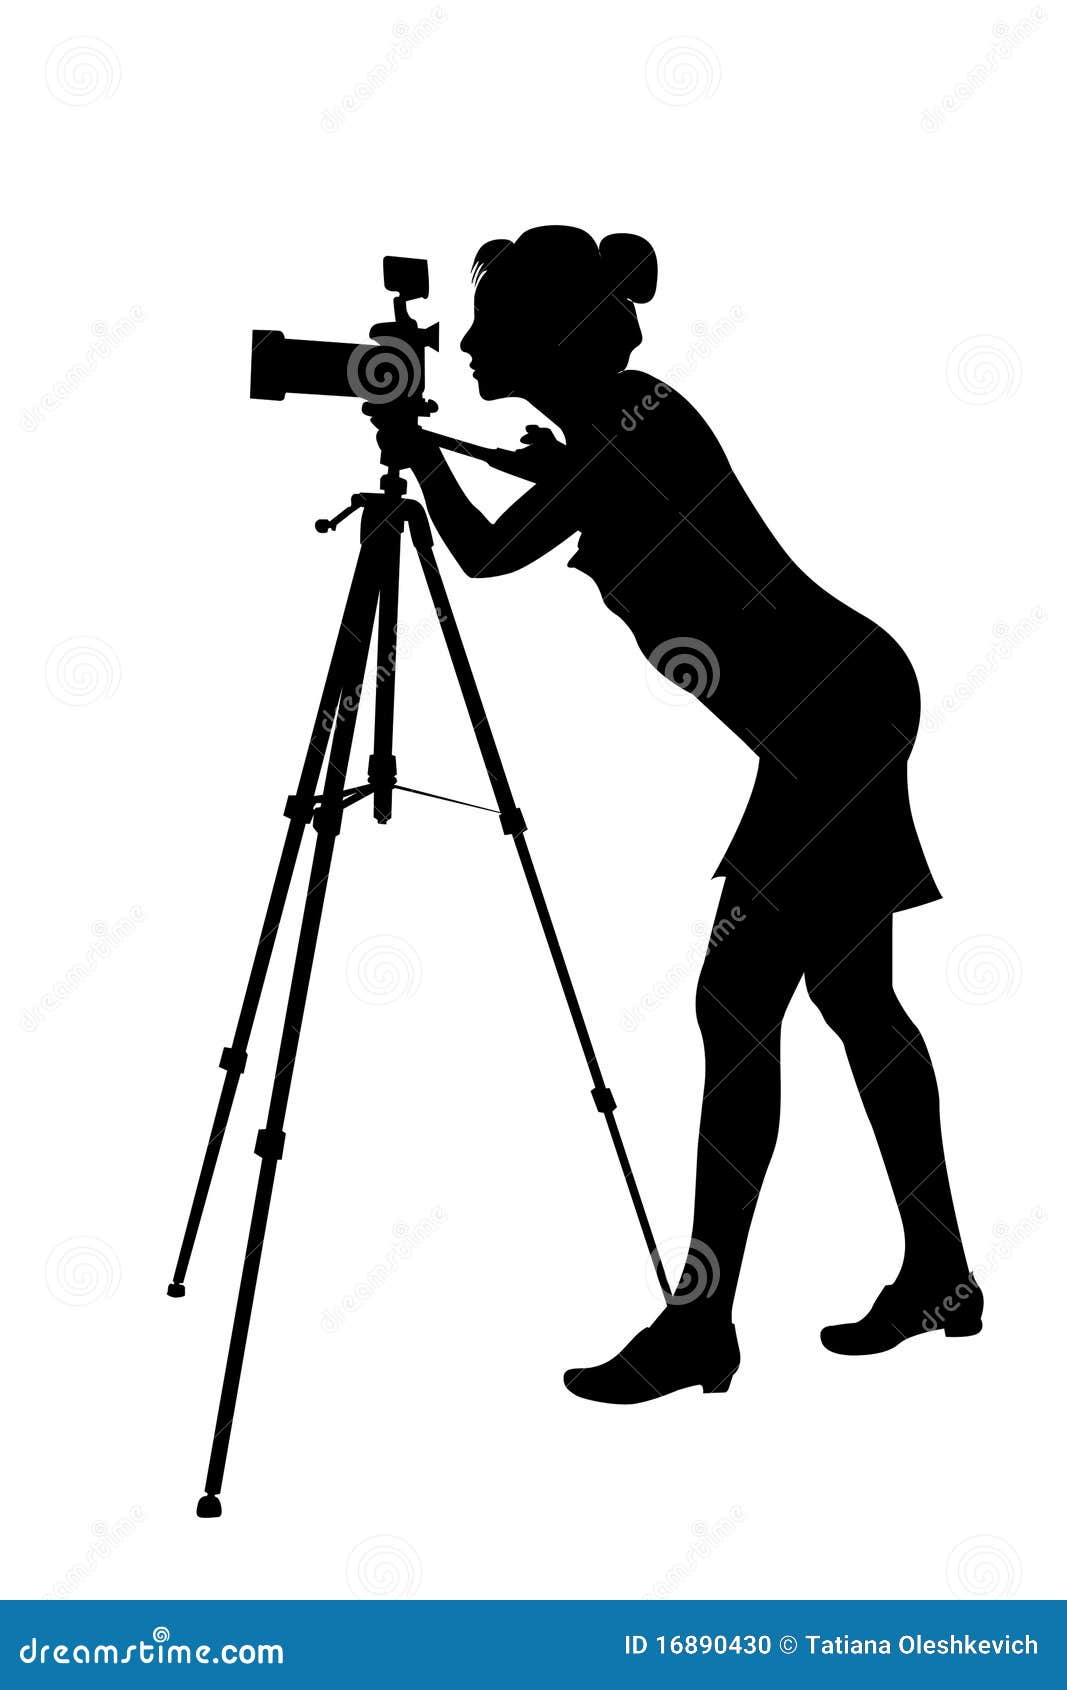 clipart woman with camera - photo #32